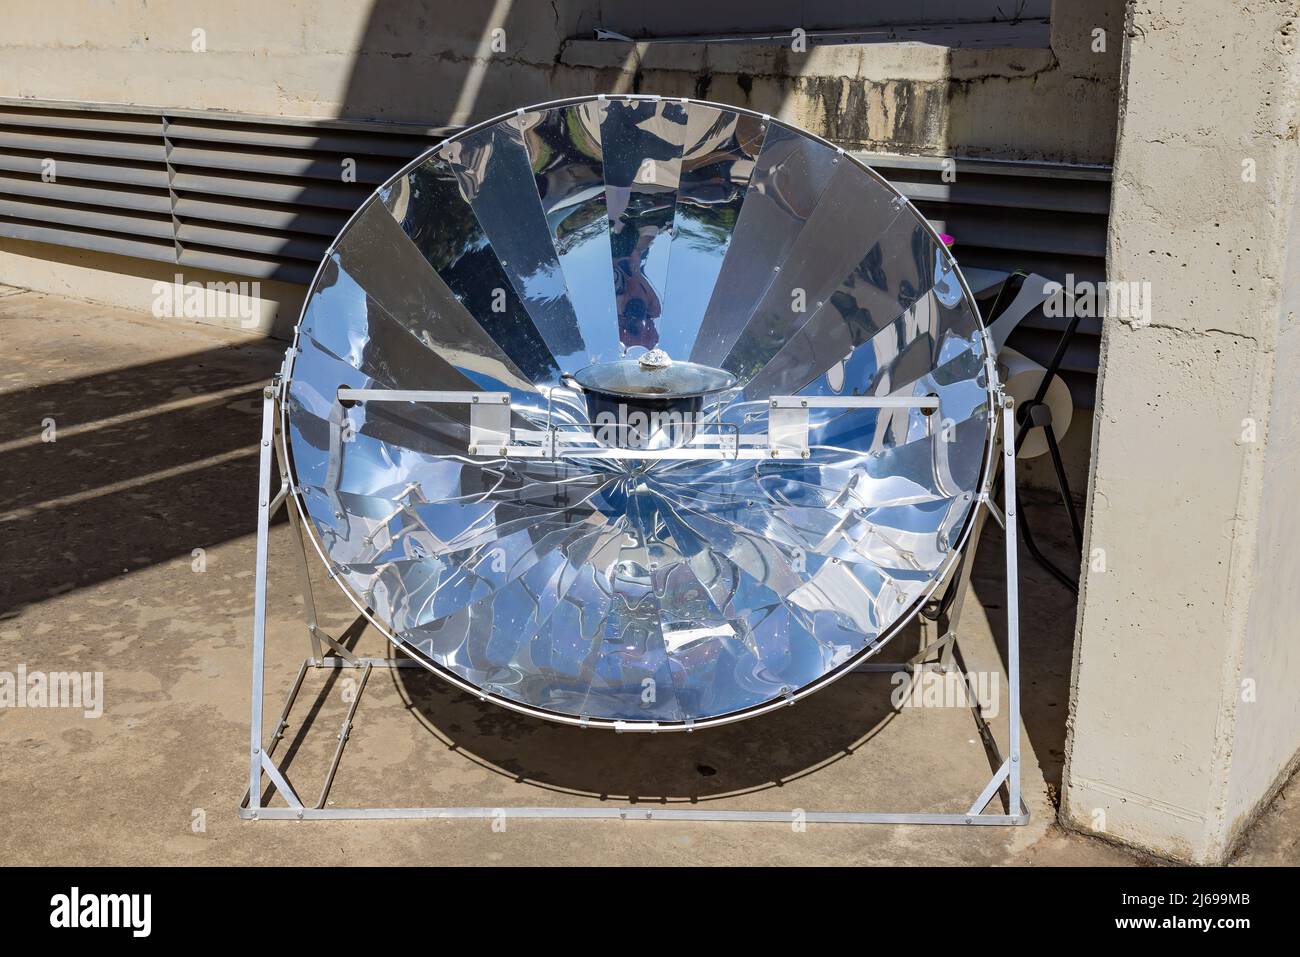 Cooking with sun energy, parabolic solar oven in the middle of cooking a dish thanks to solar energy Stock Photo